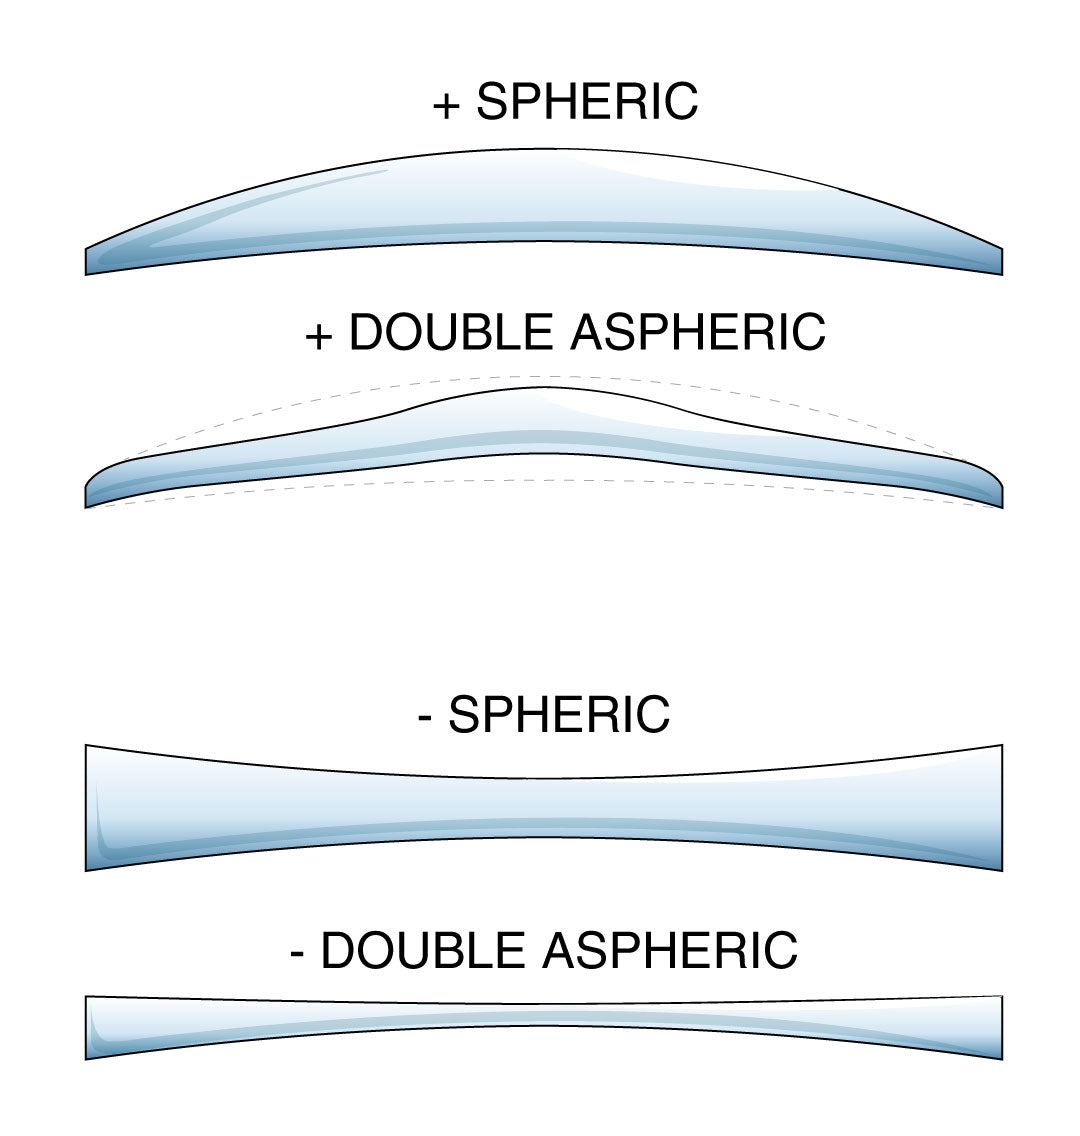 Illustration comparison of spheric and double aspheric spectacle lenses